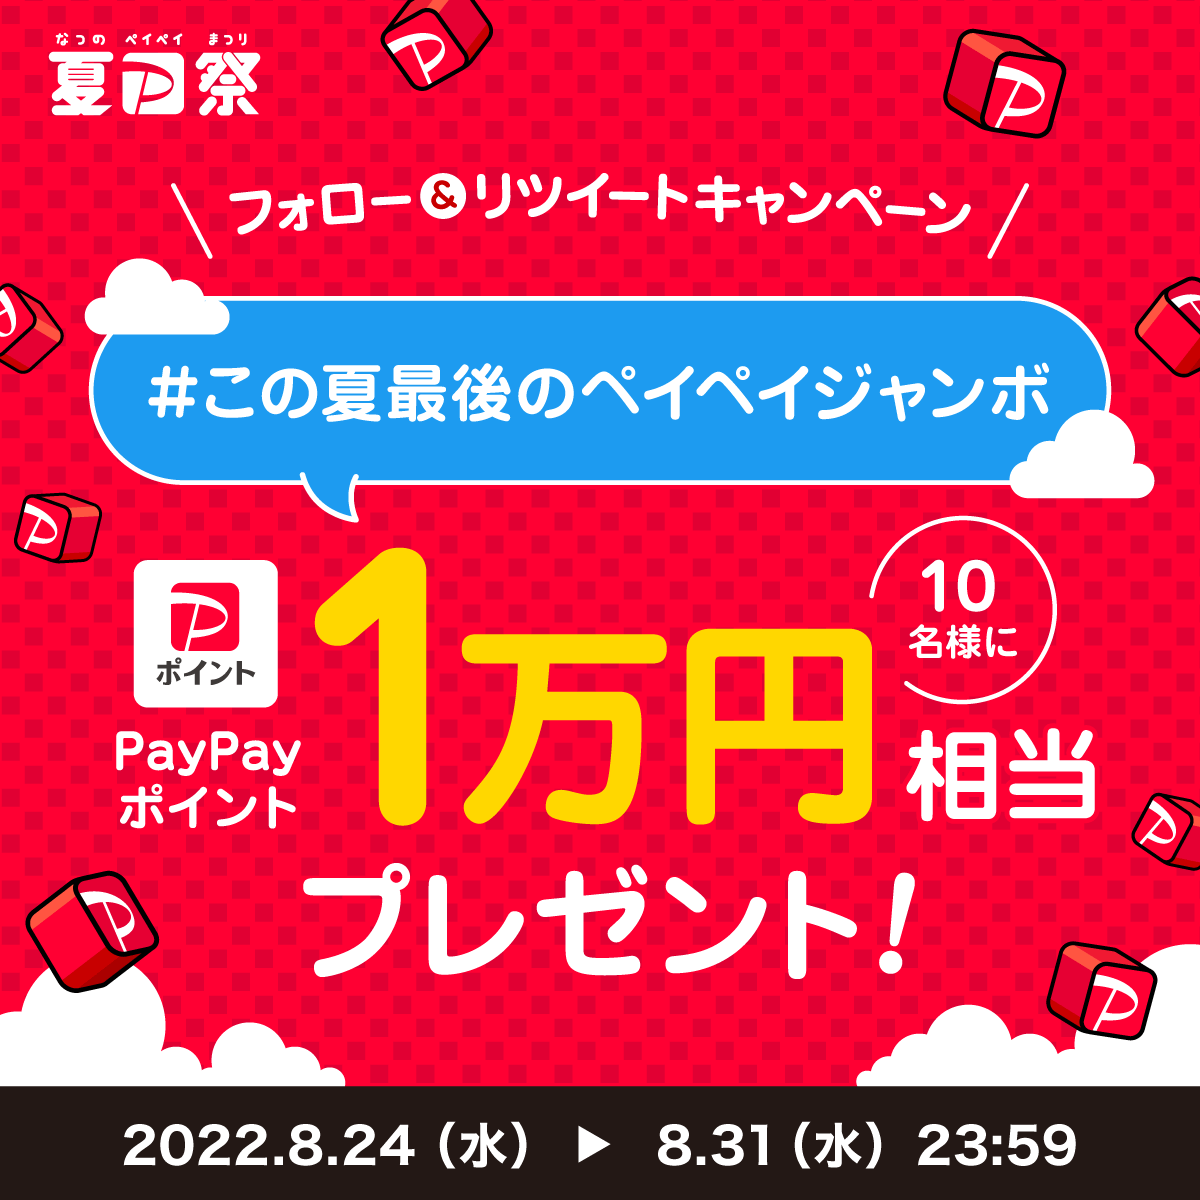 Paypay株式会社 Paypayofficial Twitter